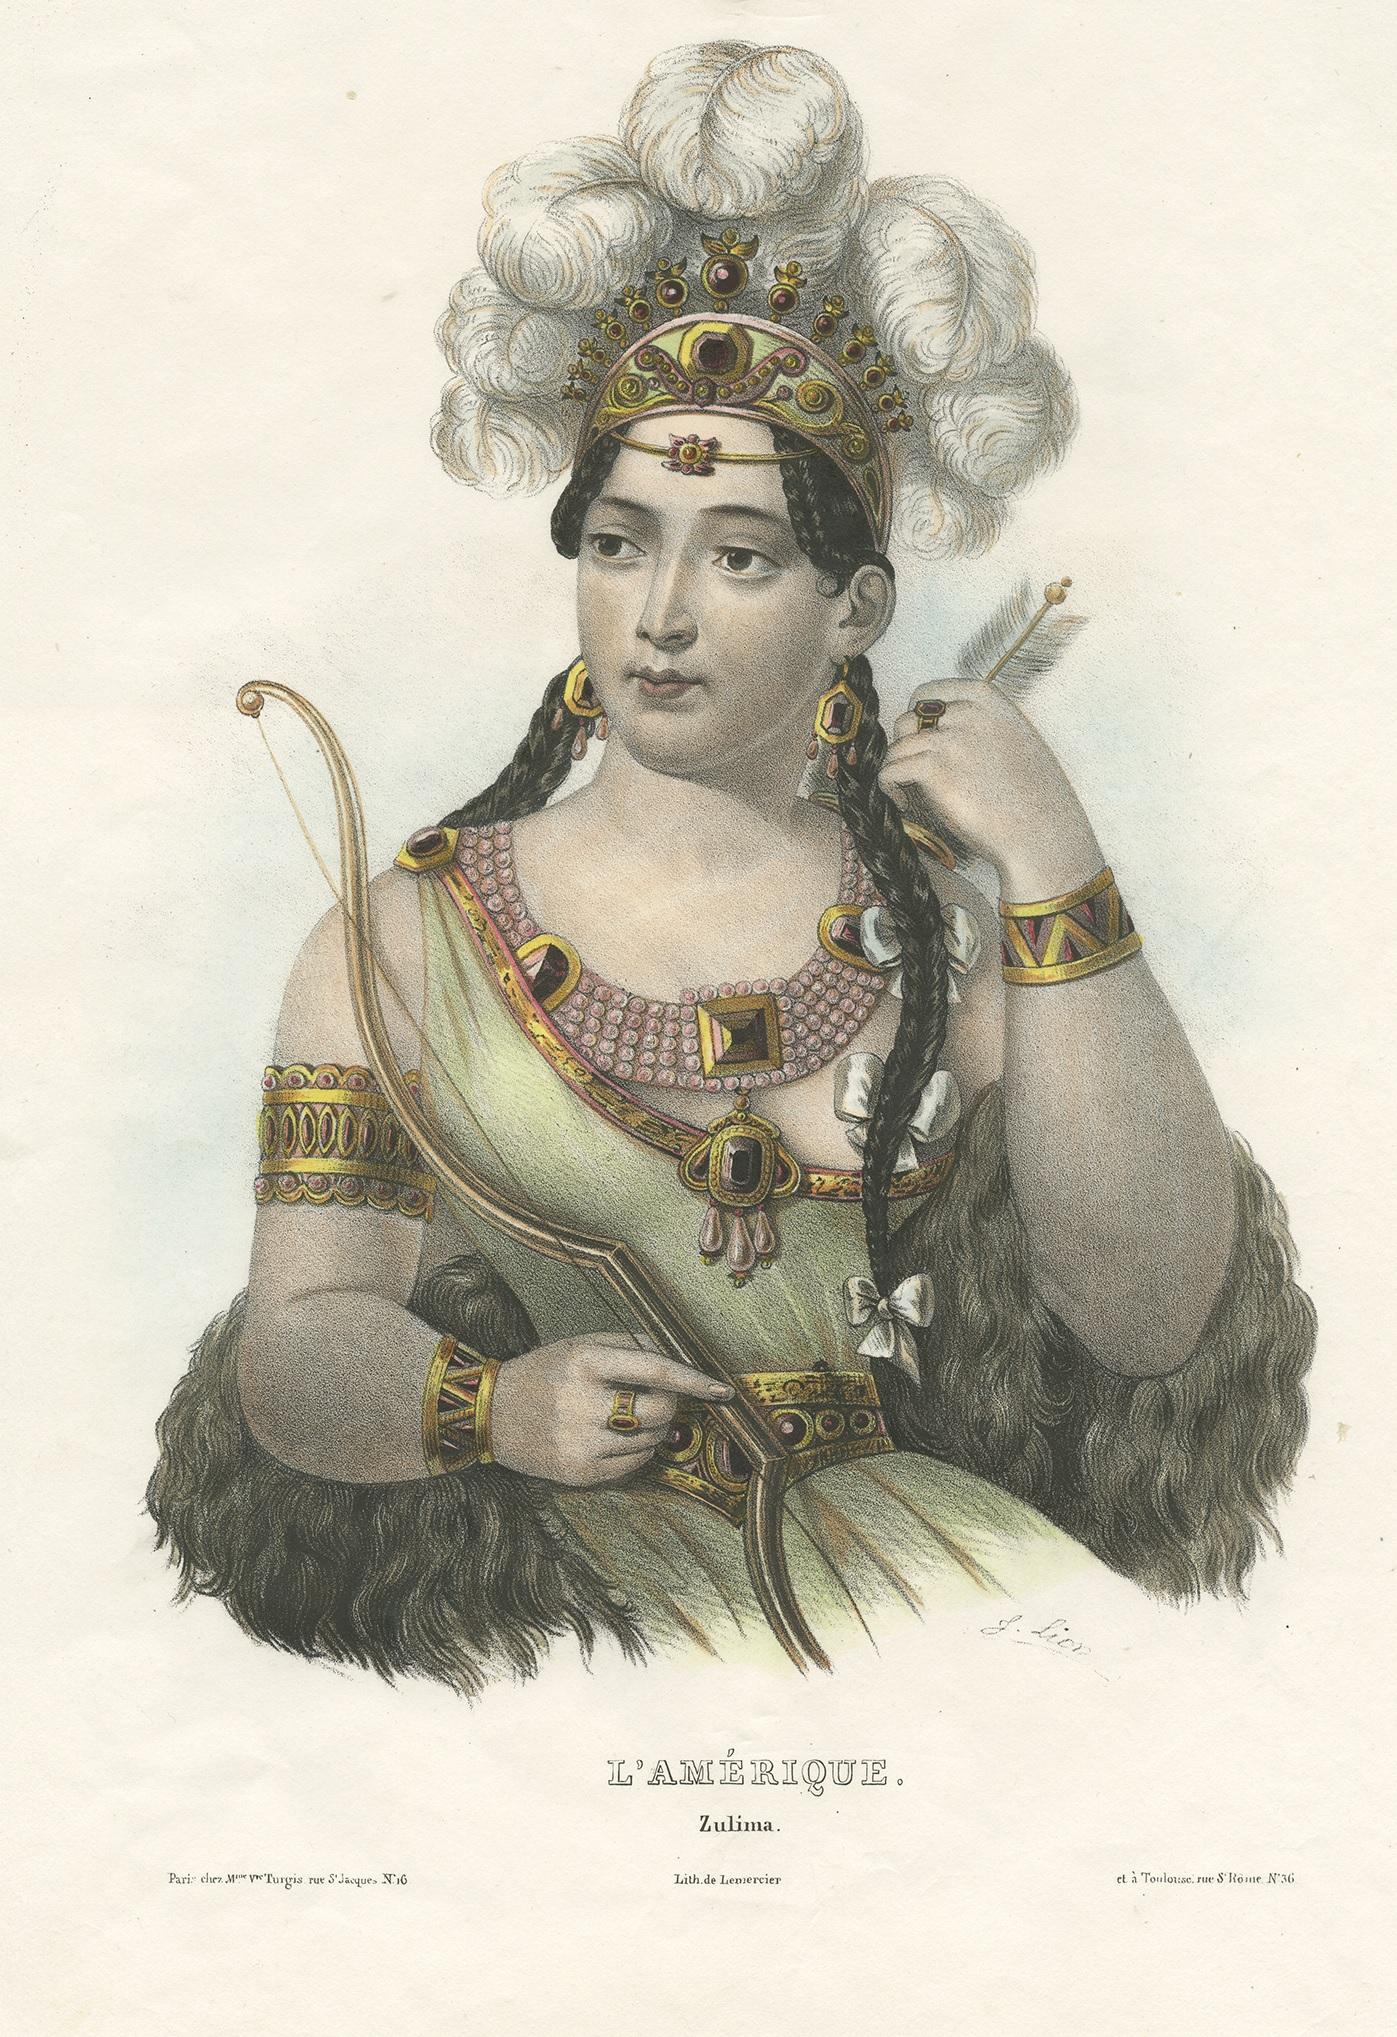 Antique print titled 'L'Amérique - Zulima'. Beautiful lithograph of an American costume. Lithographed by Lemercier, circa 1840.